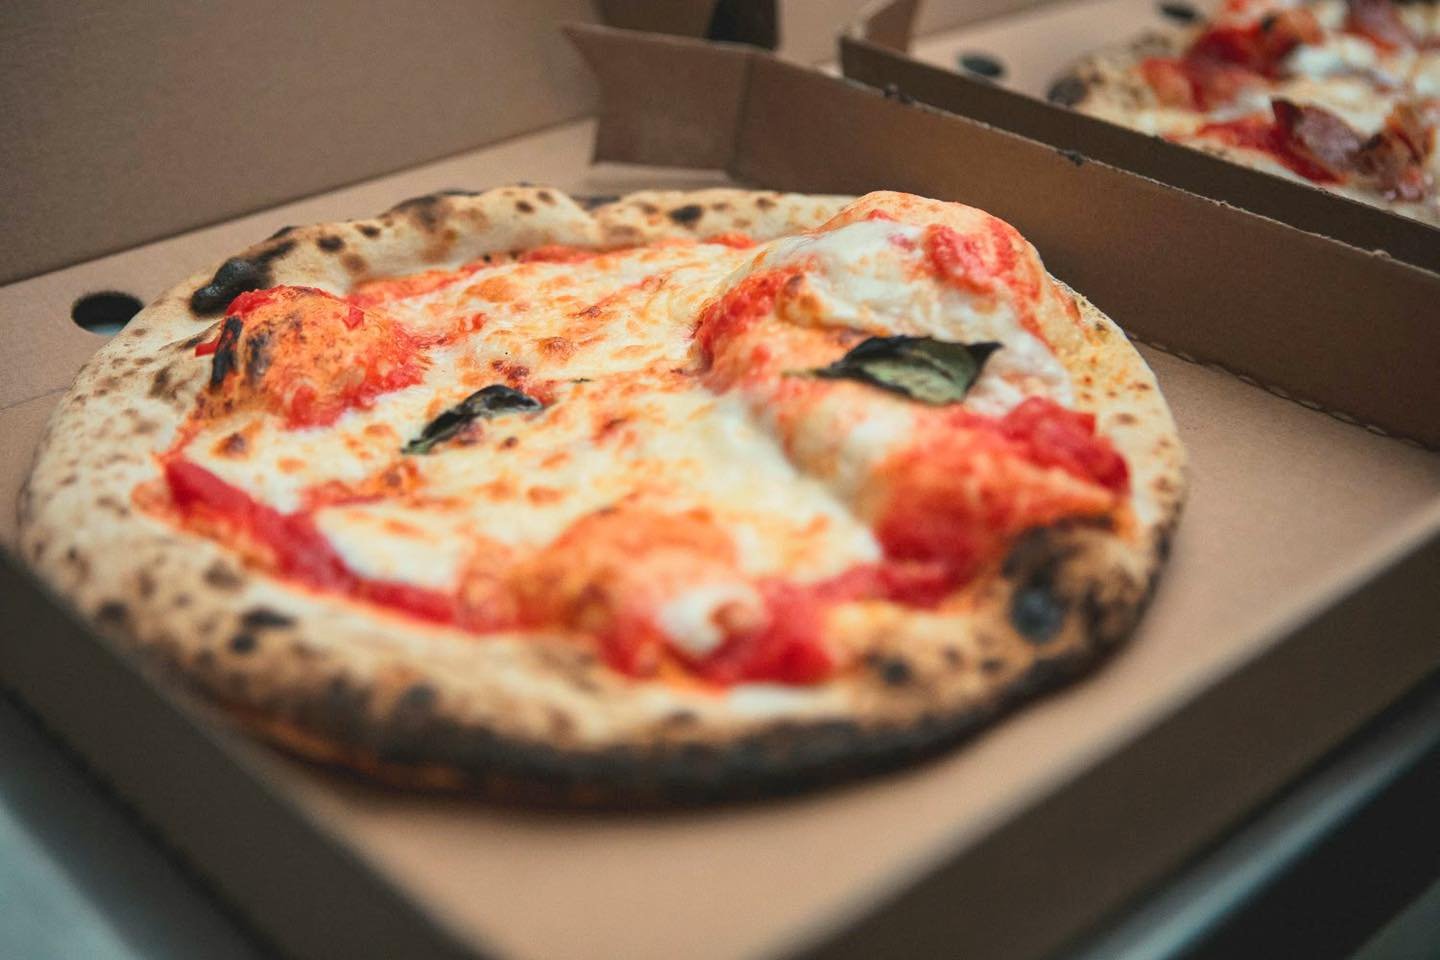 Tonight, the Slow Dough Pizza Co. returns to The Royal Oak from 5:30 pm onwards! 🍕 Don't miss out on the chance to grab a slice of deliciousness with us!

#RoyalOak #SlowDoughPizza #PizzaNight #PizzaTime #PizzaLovers #PizzaParty #WoodFiredPizza #Tas